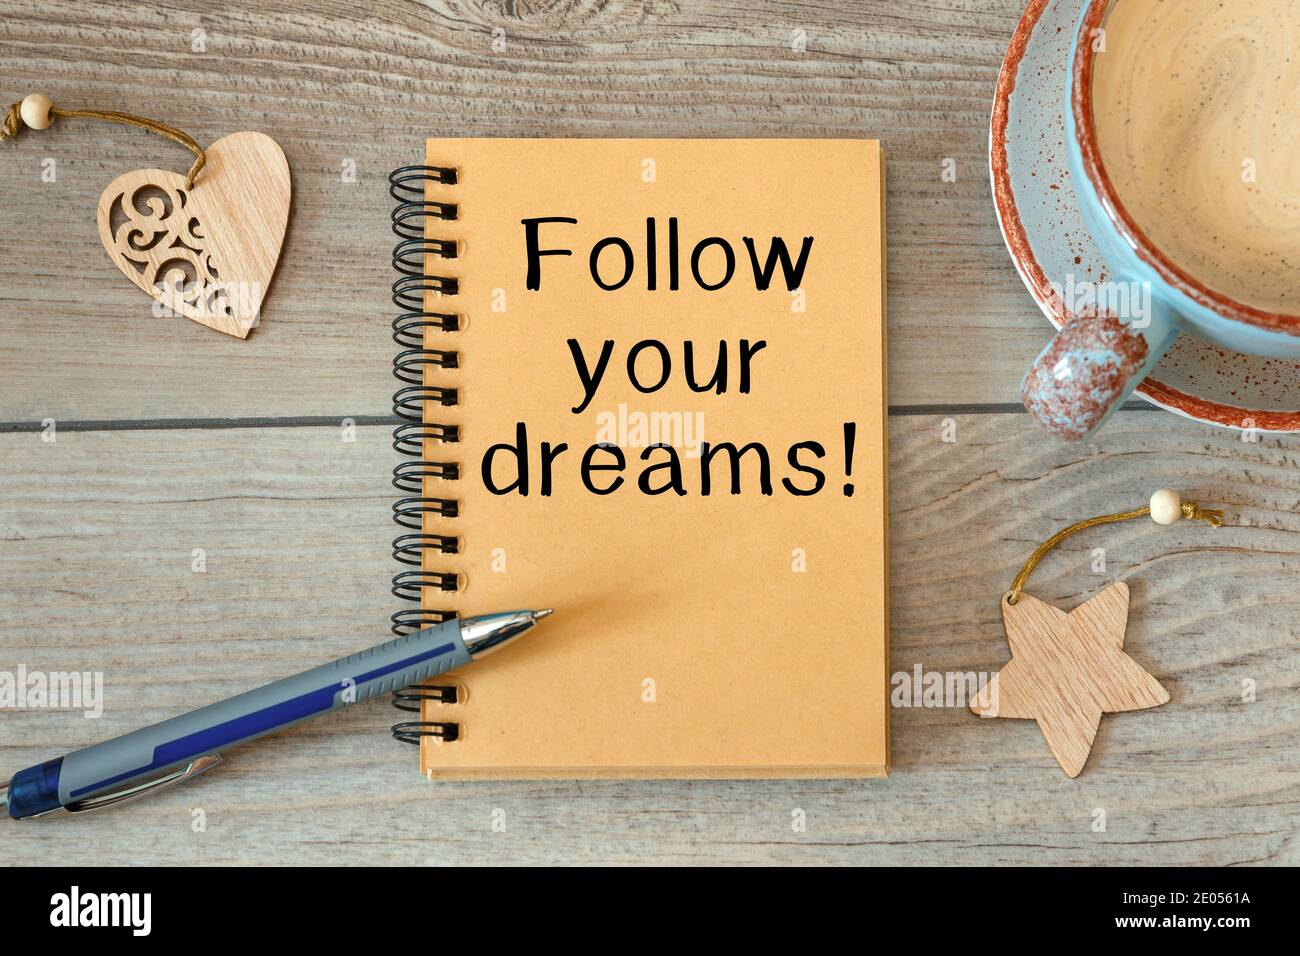 Conceptual manuscript showing Follow your dreams. Clarify your ideas, focus your efforts and use your powers wisely. Stock Photo